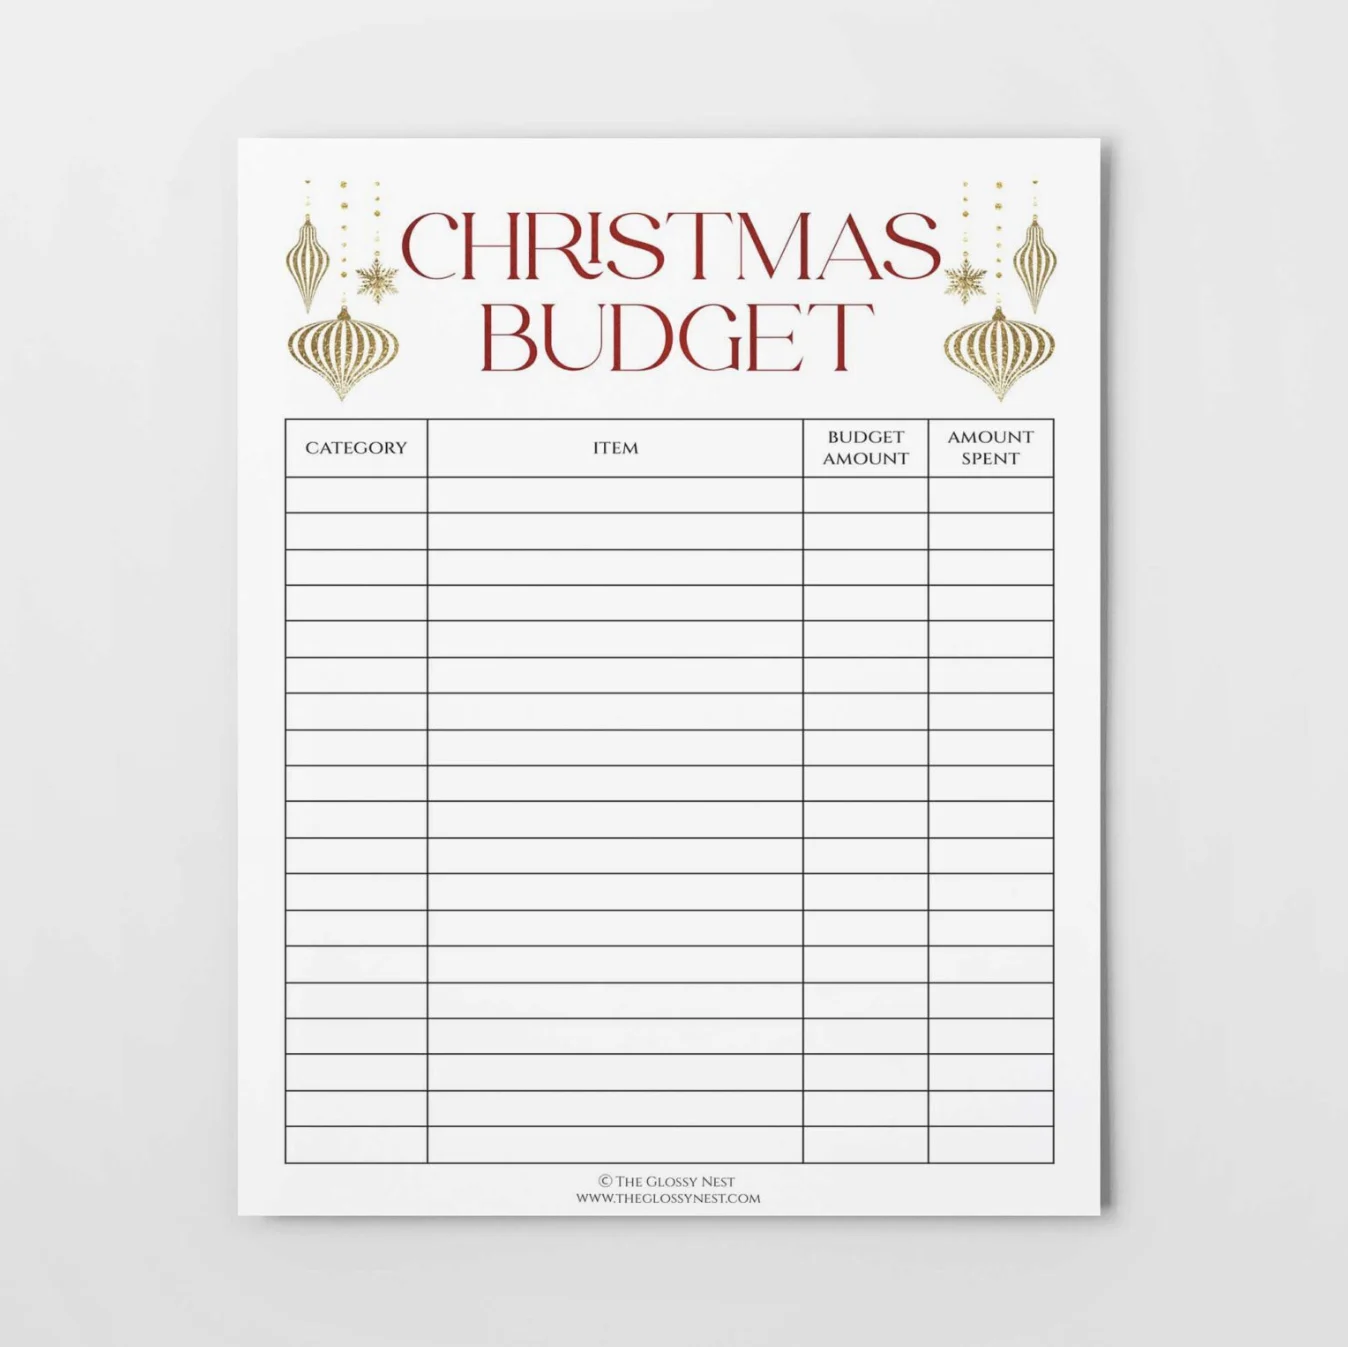 simple columns and rows Christmas Budget printable sheet with lovely gold ornaments on top